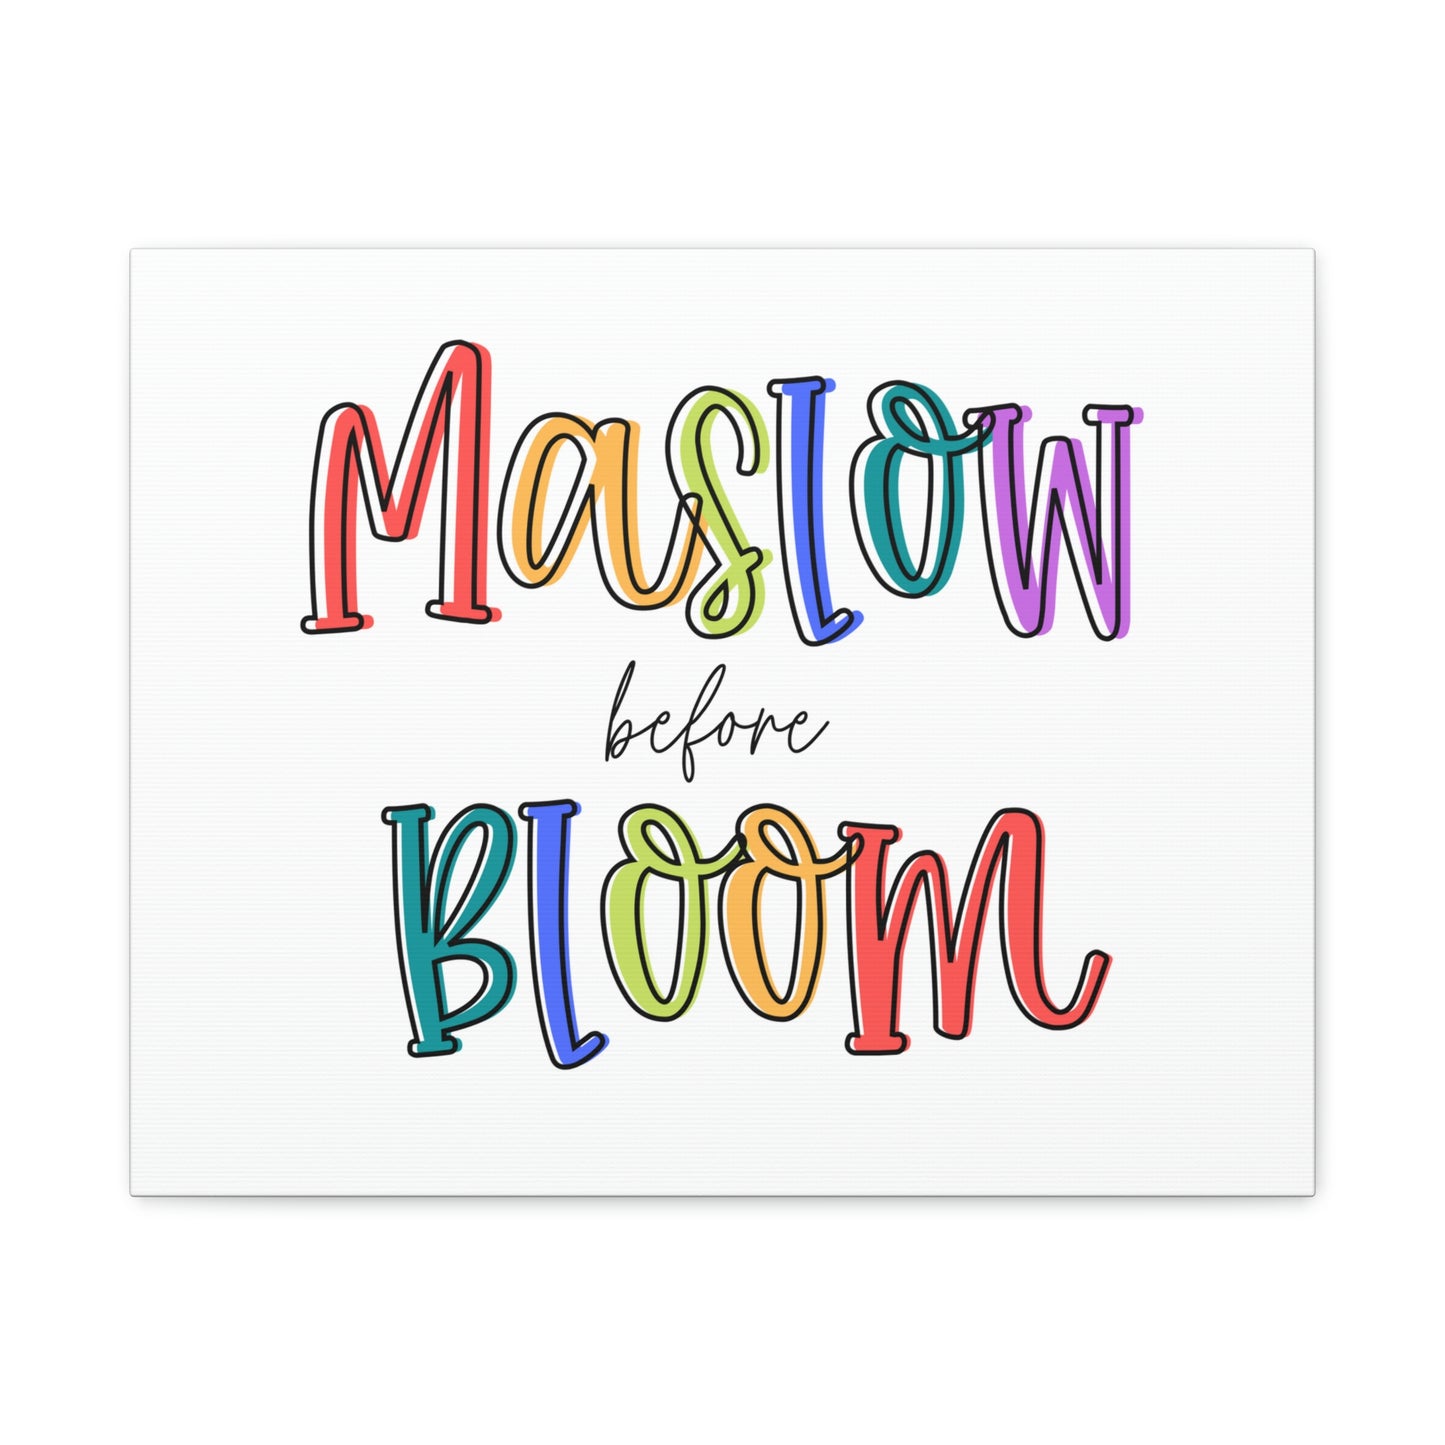 Maslow Before Bloom Canvas Print (20 x 16 in)